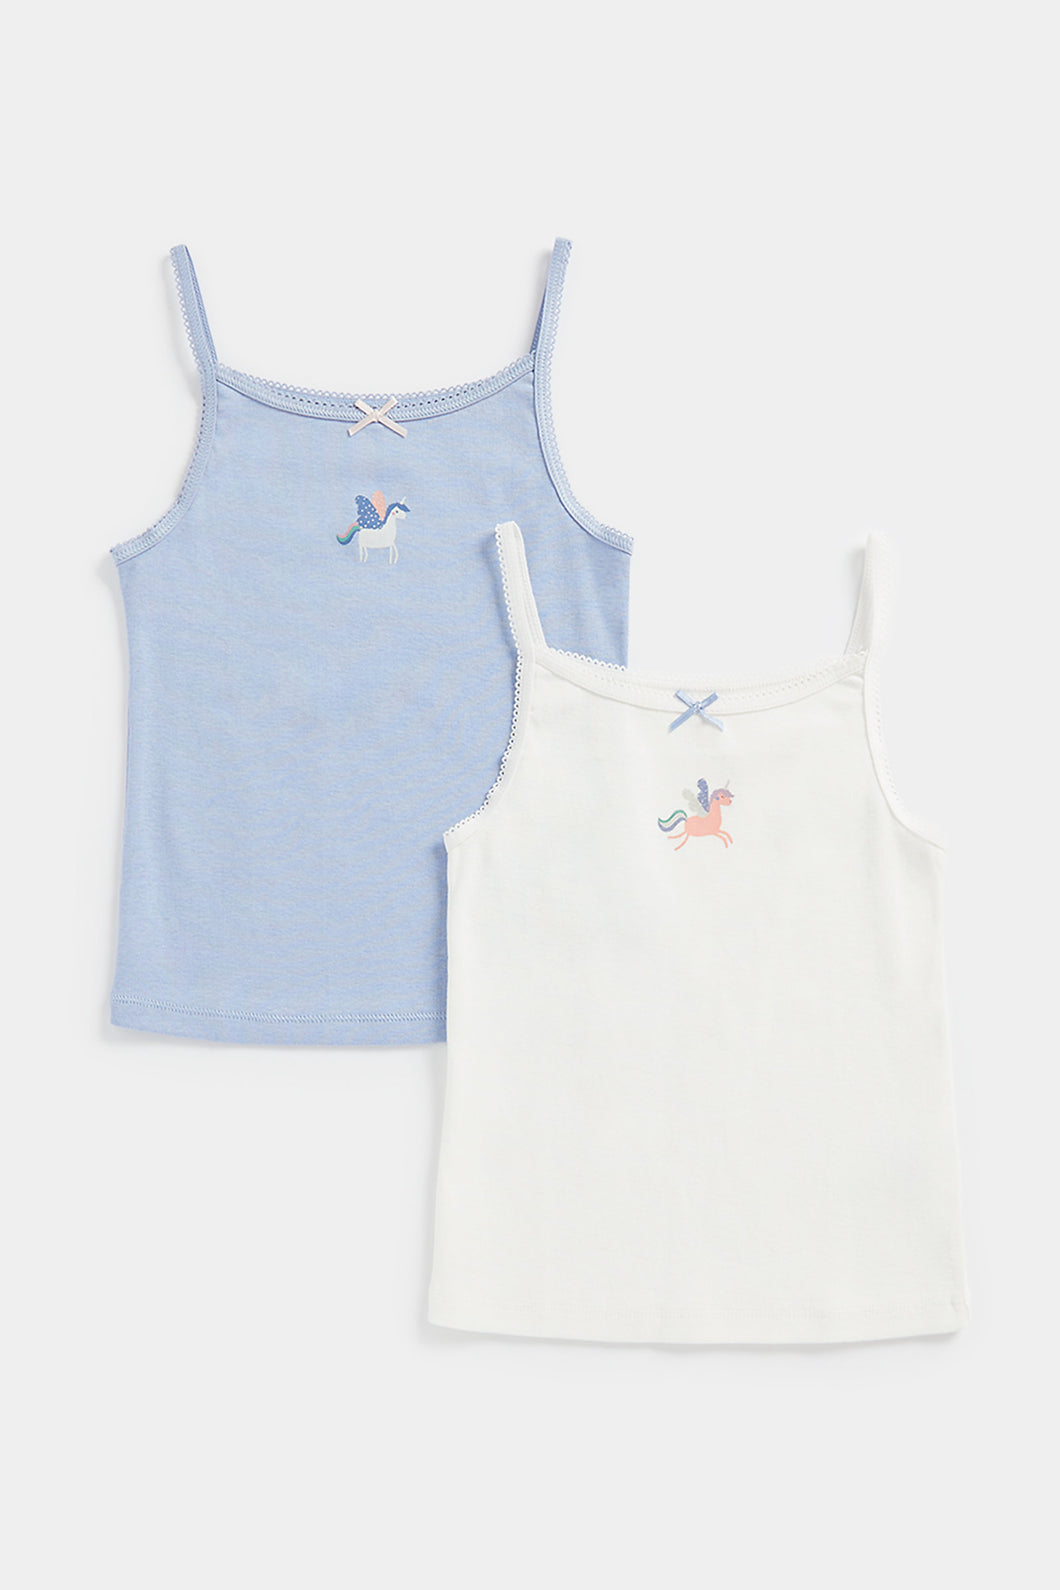 Mothercare Unicorn Camisole Vests - 2 Pack